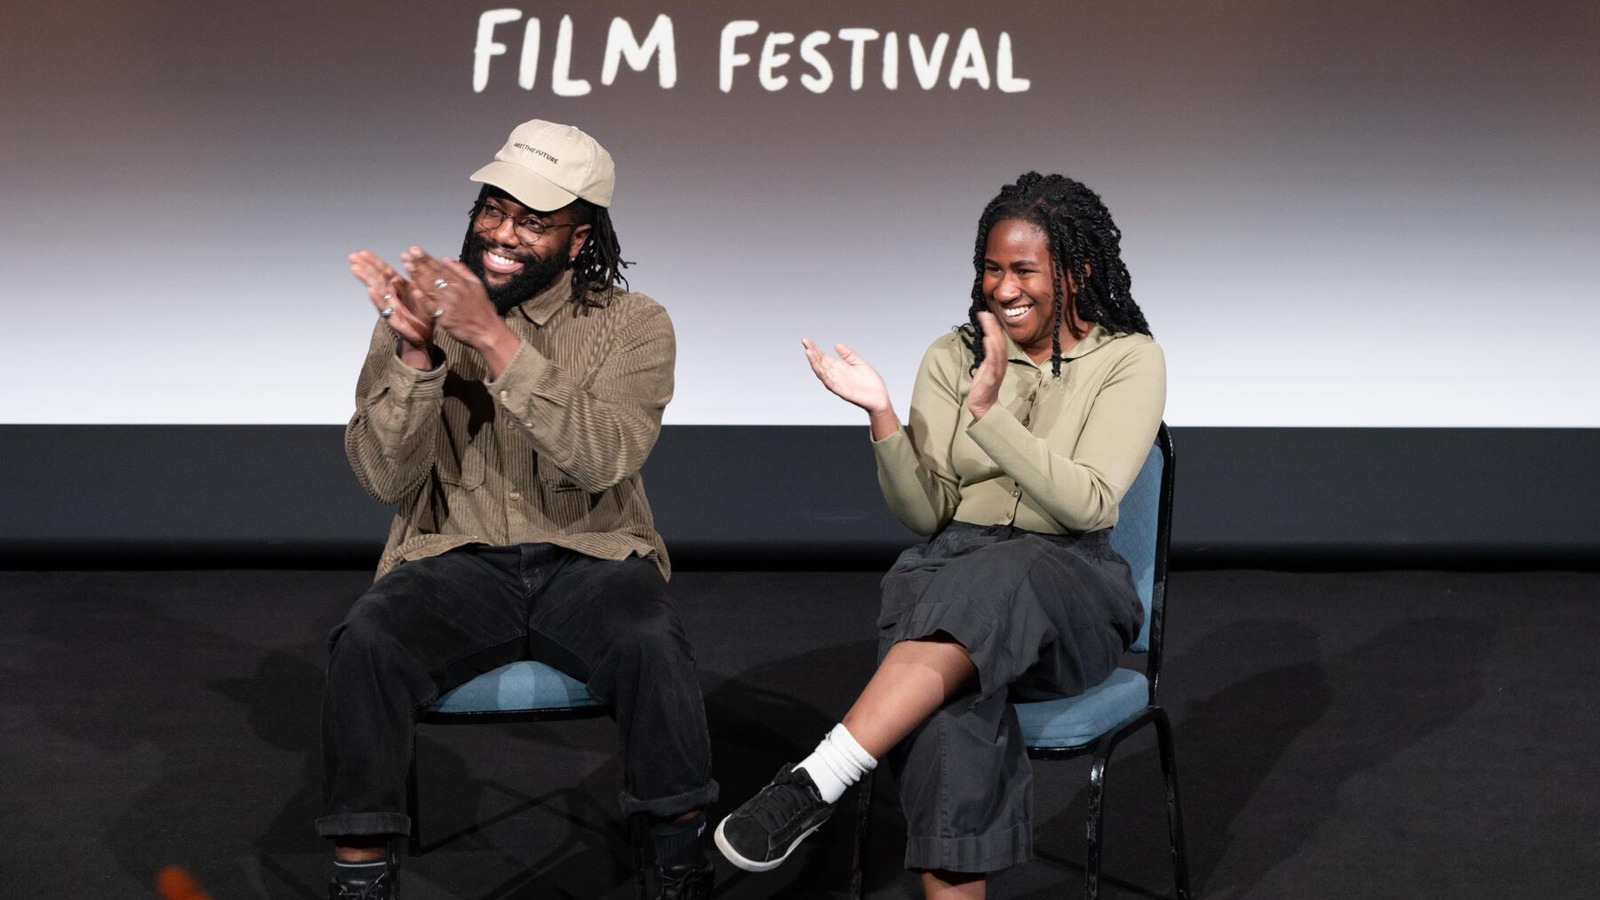 Two panel speakers are sat on stage clapping and smiling. Behind them, on the cinema screen, text reads: Film Festival.